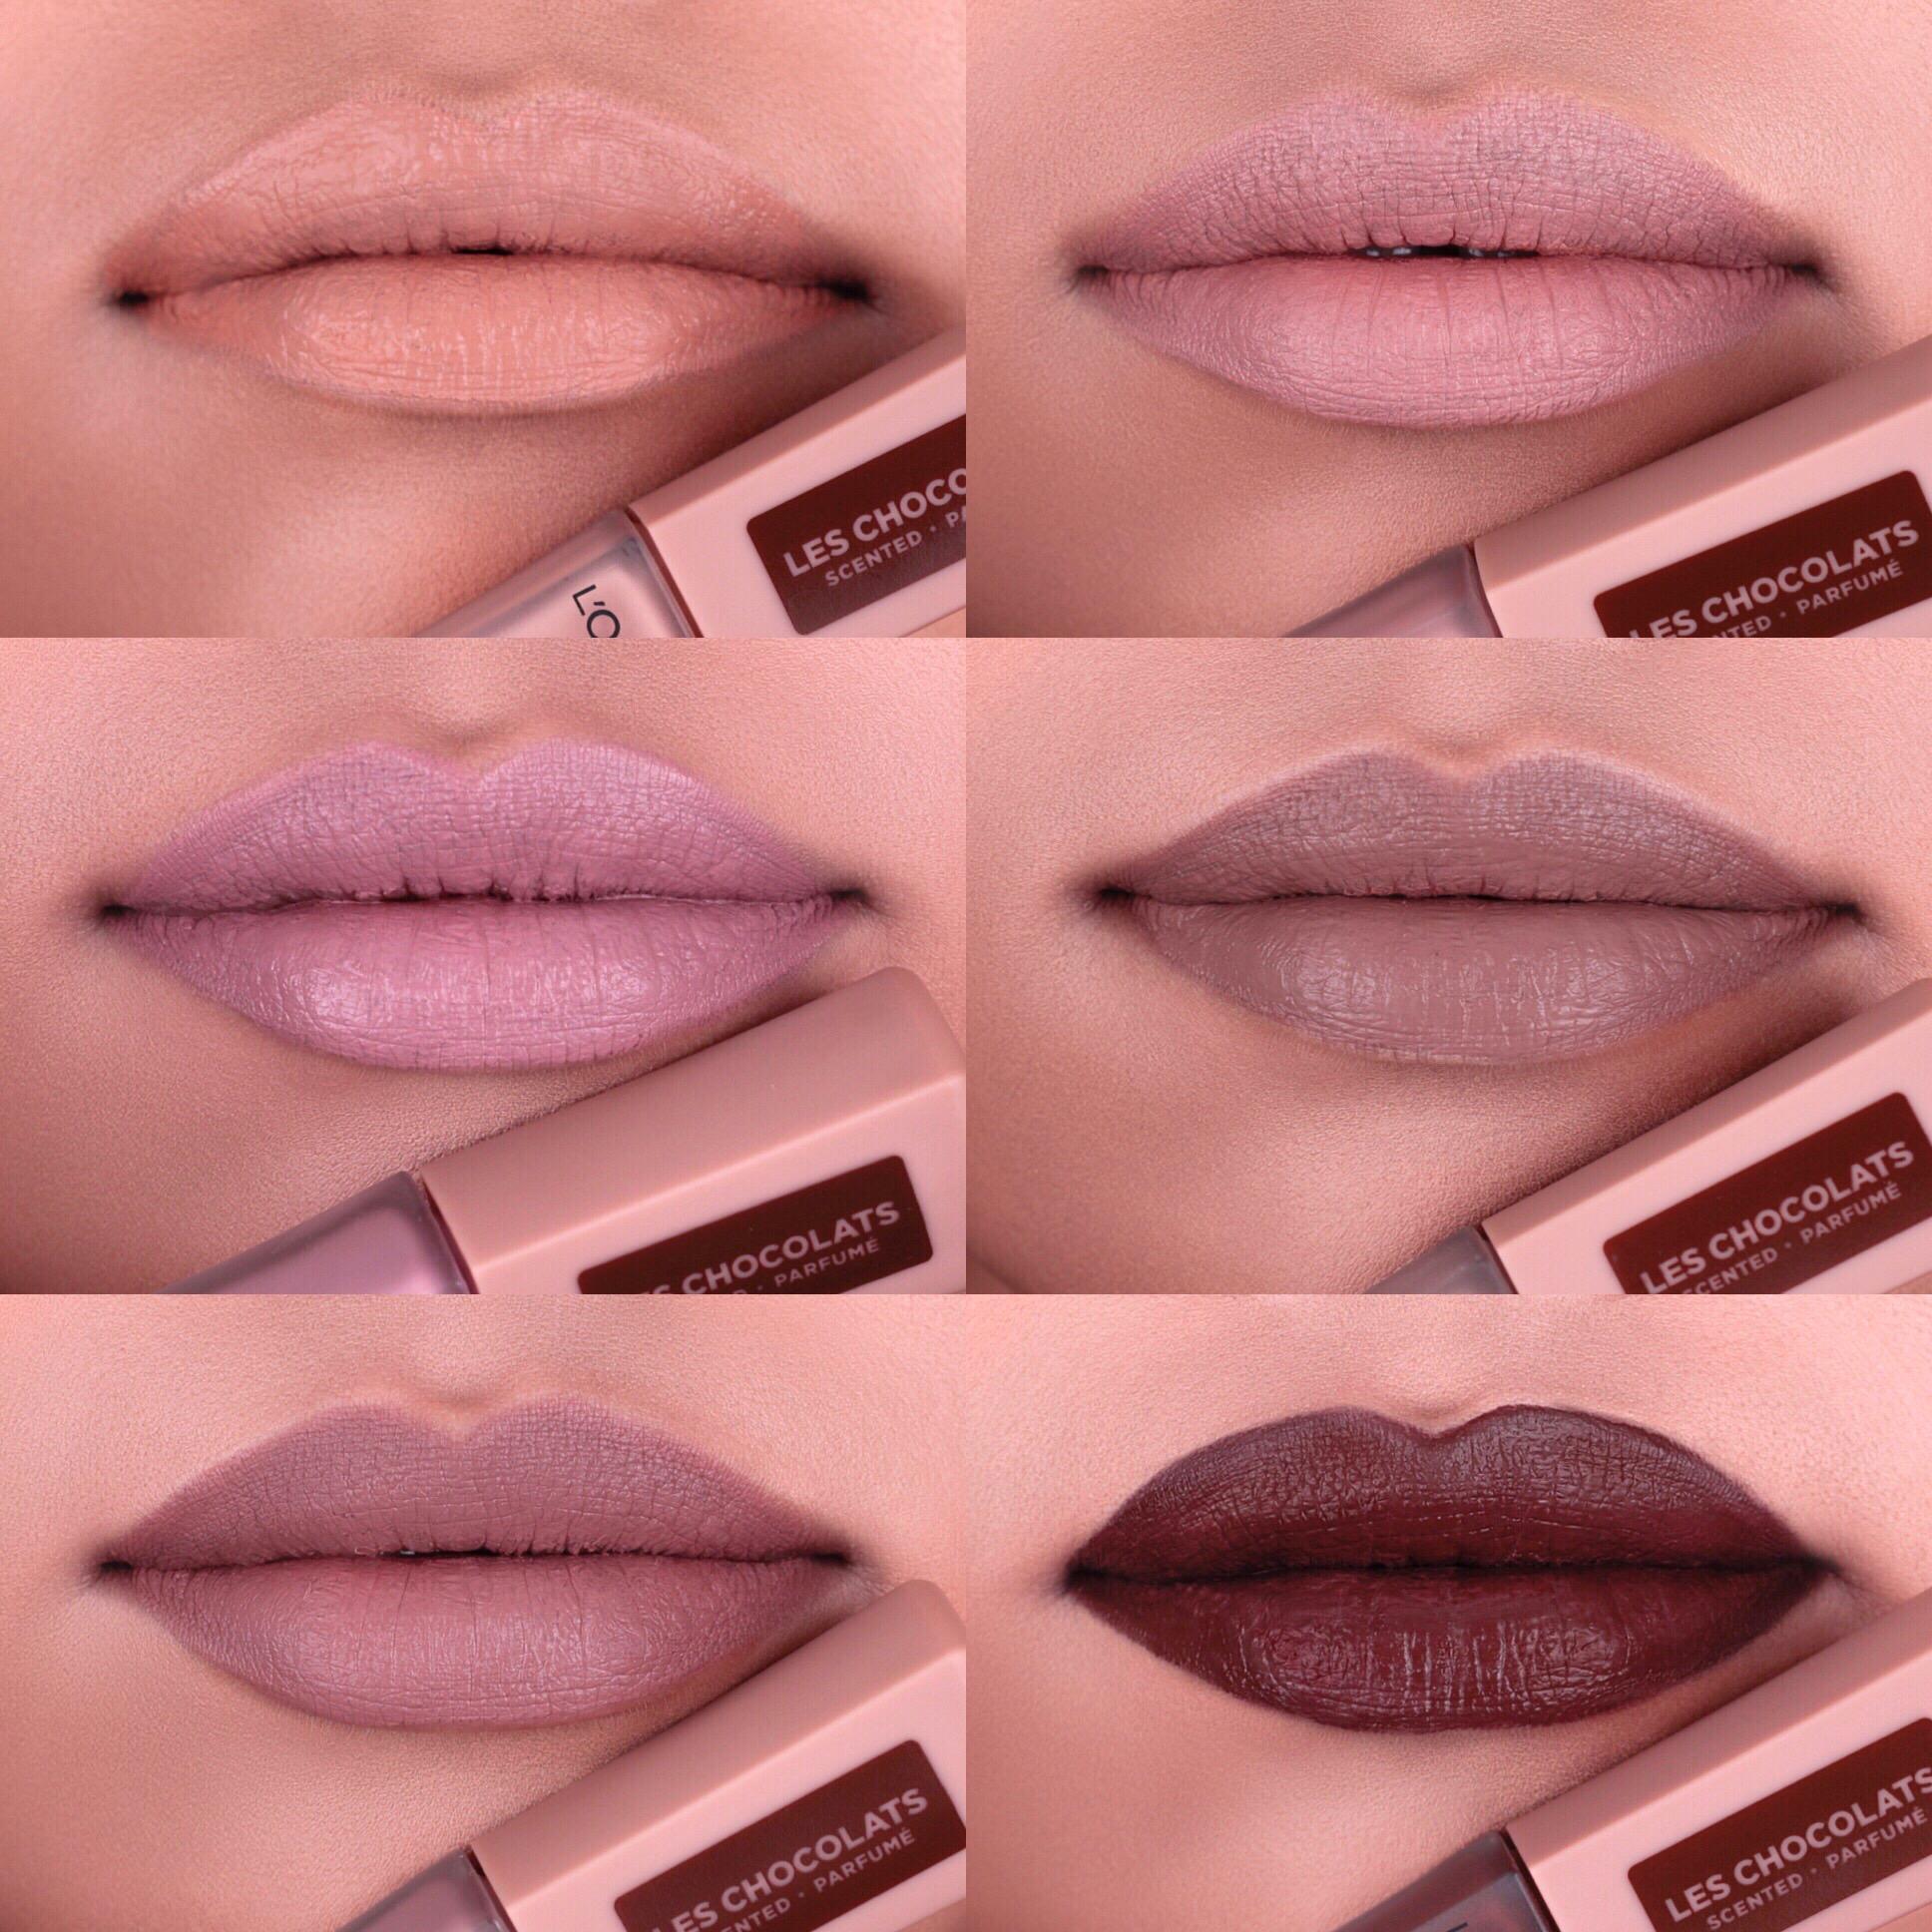 L'Oréal Paris USA on X: "All-day wear with a chocolate aroma... Infallible  Pro Matte Liquid Lipstick just got even more addictive! Introducing Les  Chocolats Scented nude liquid lipsticks 💕🍫Available now at  https://t.co/ilaLVbMzKV,